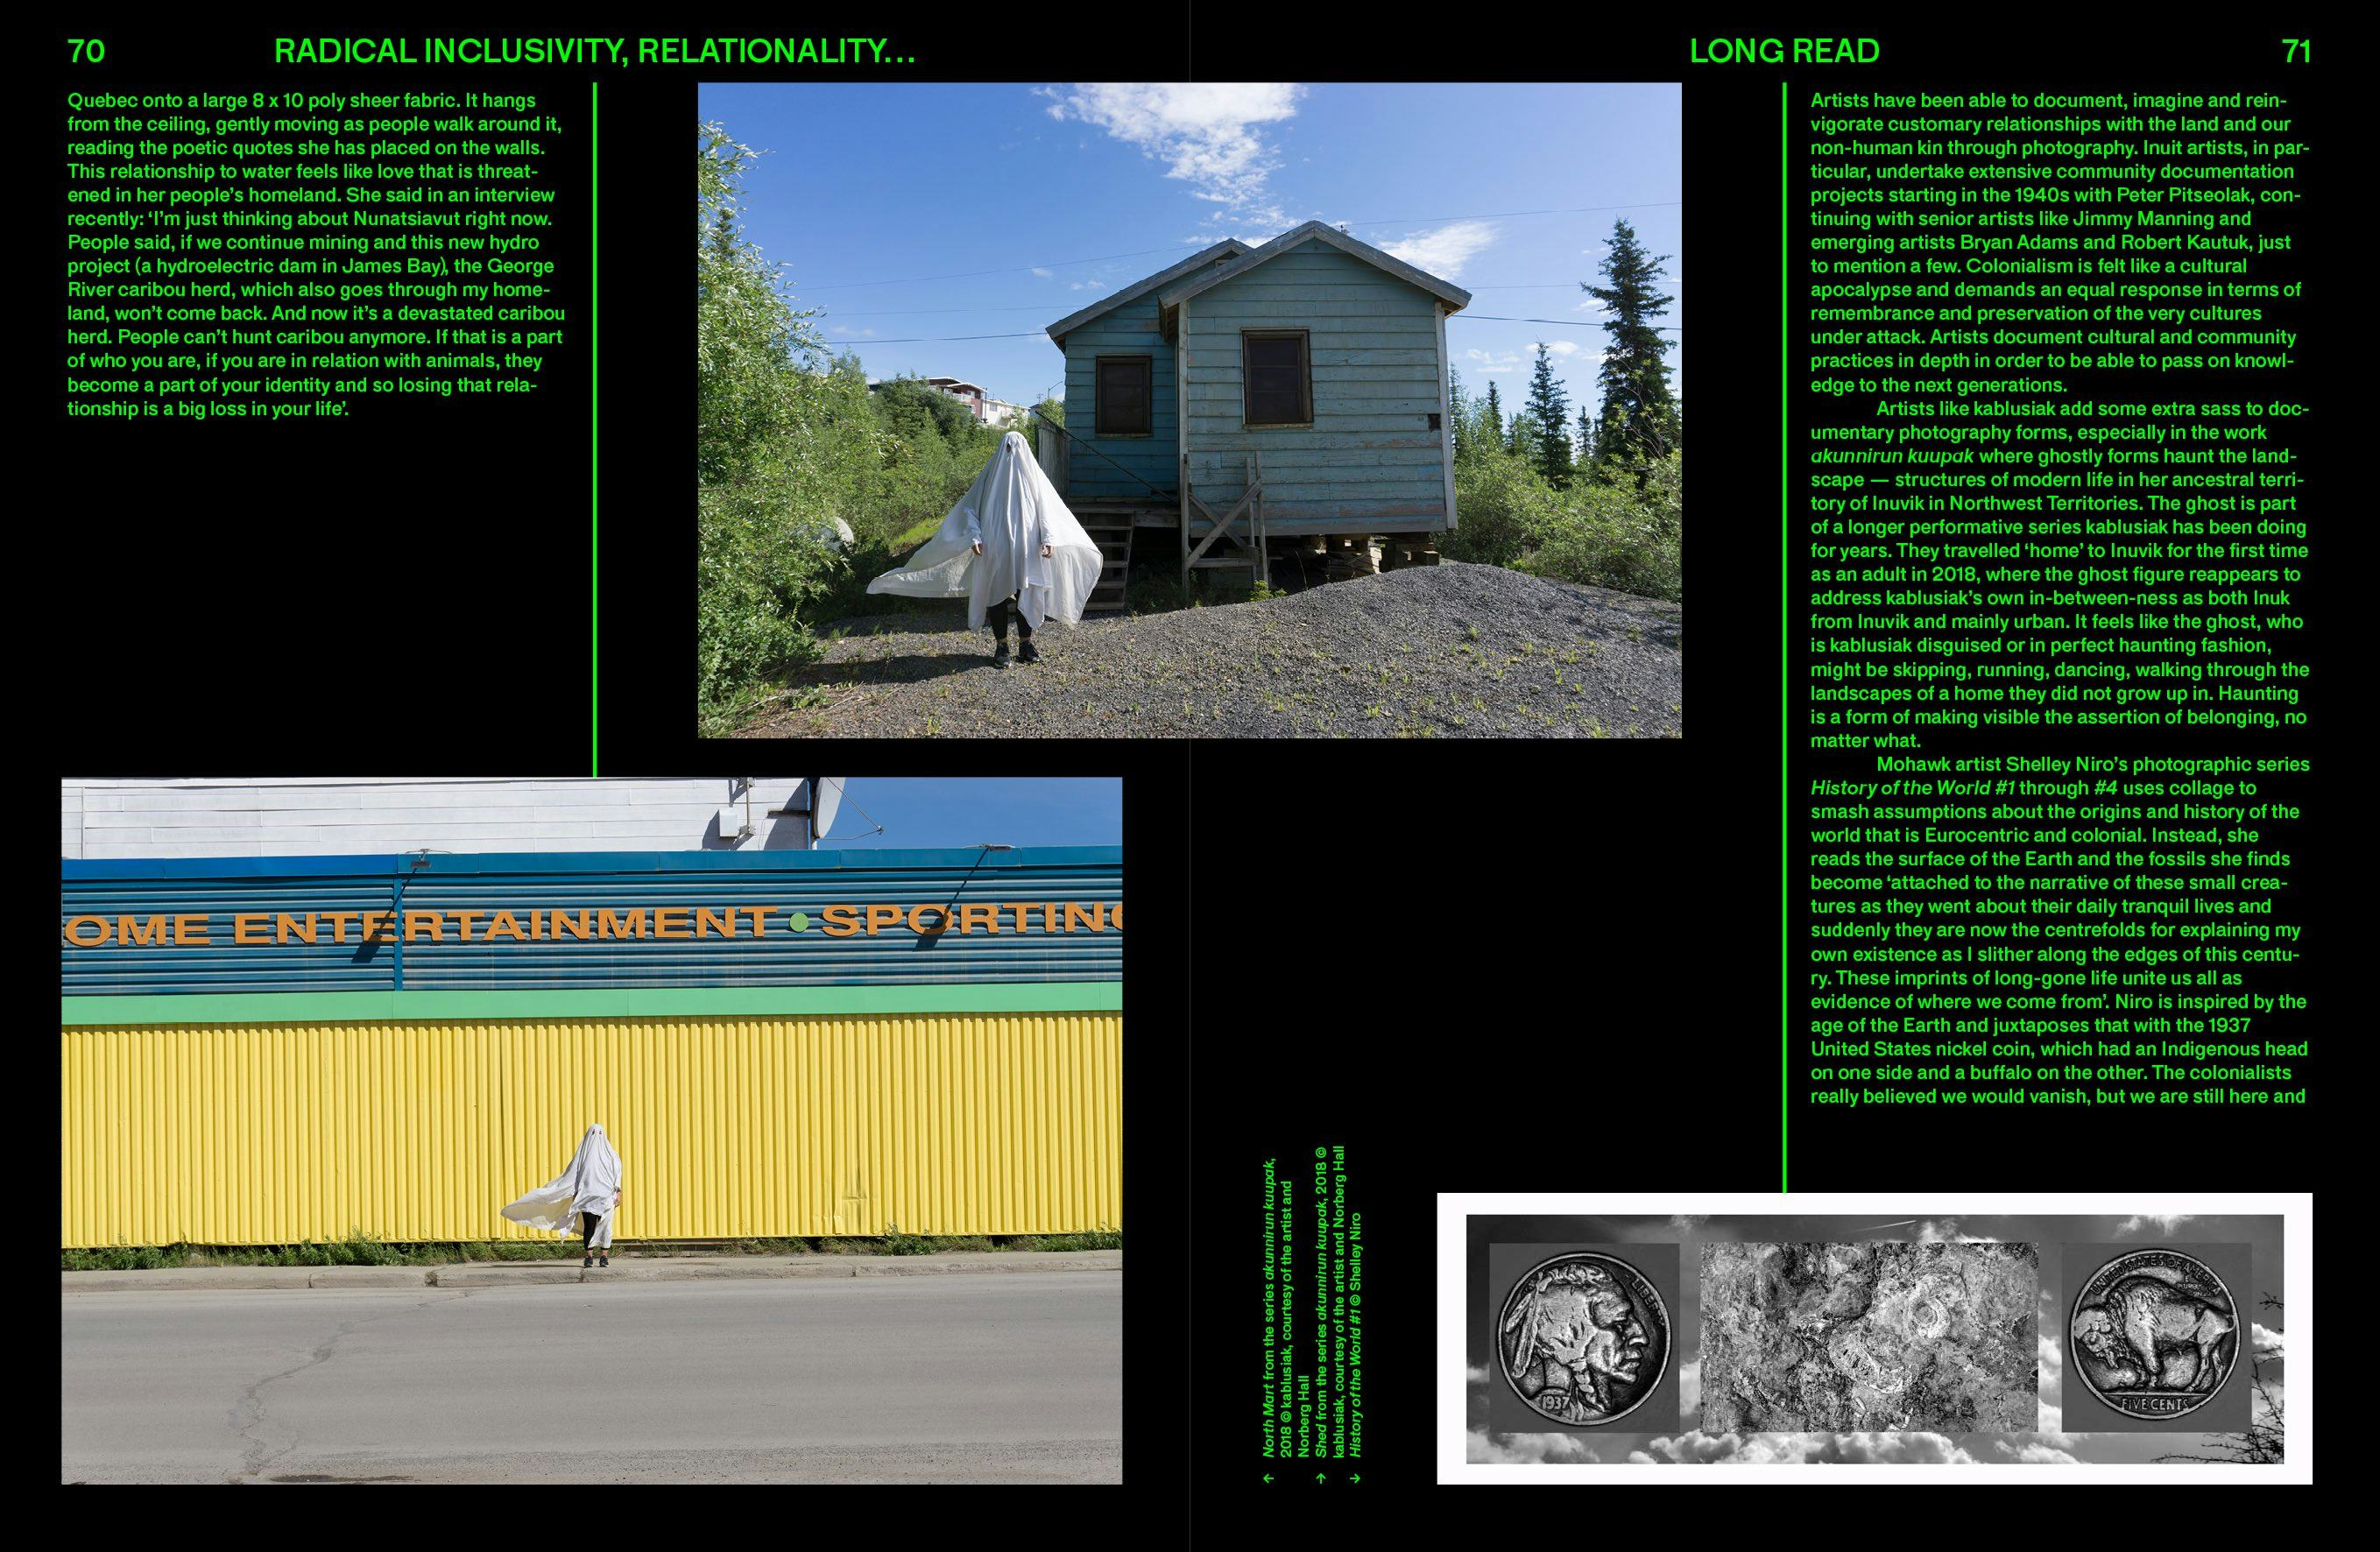 Spread from Foam Magazine #64: EXTREMES–The Environmental Issue, showing a fragment of the long read from Wanda Nanibush and two images by the artist kablusiak.